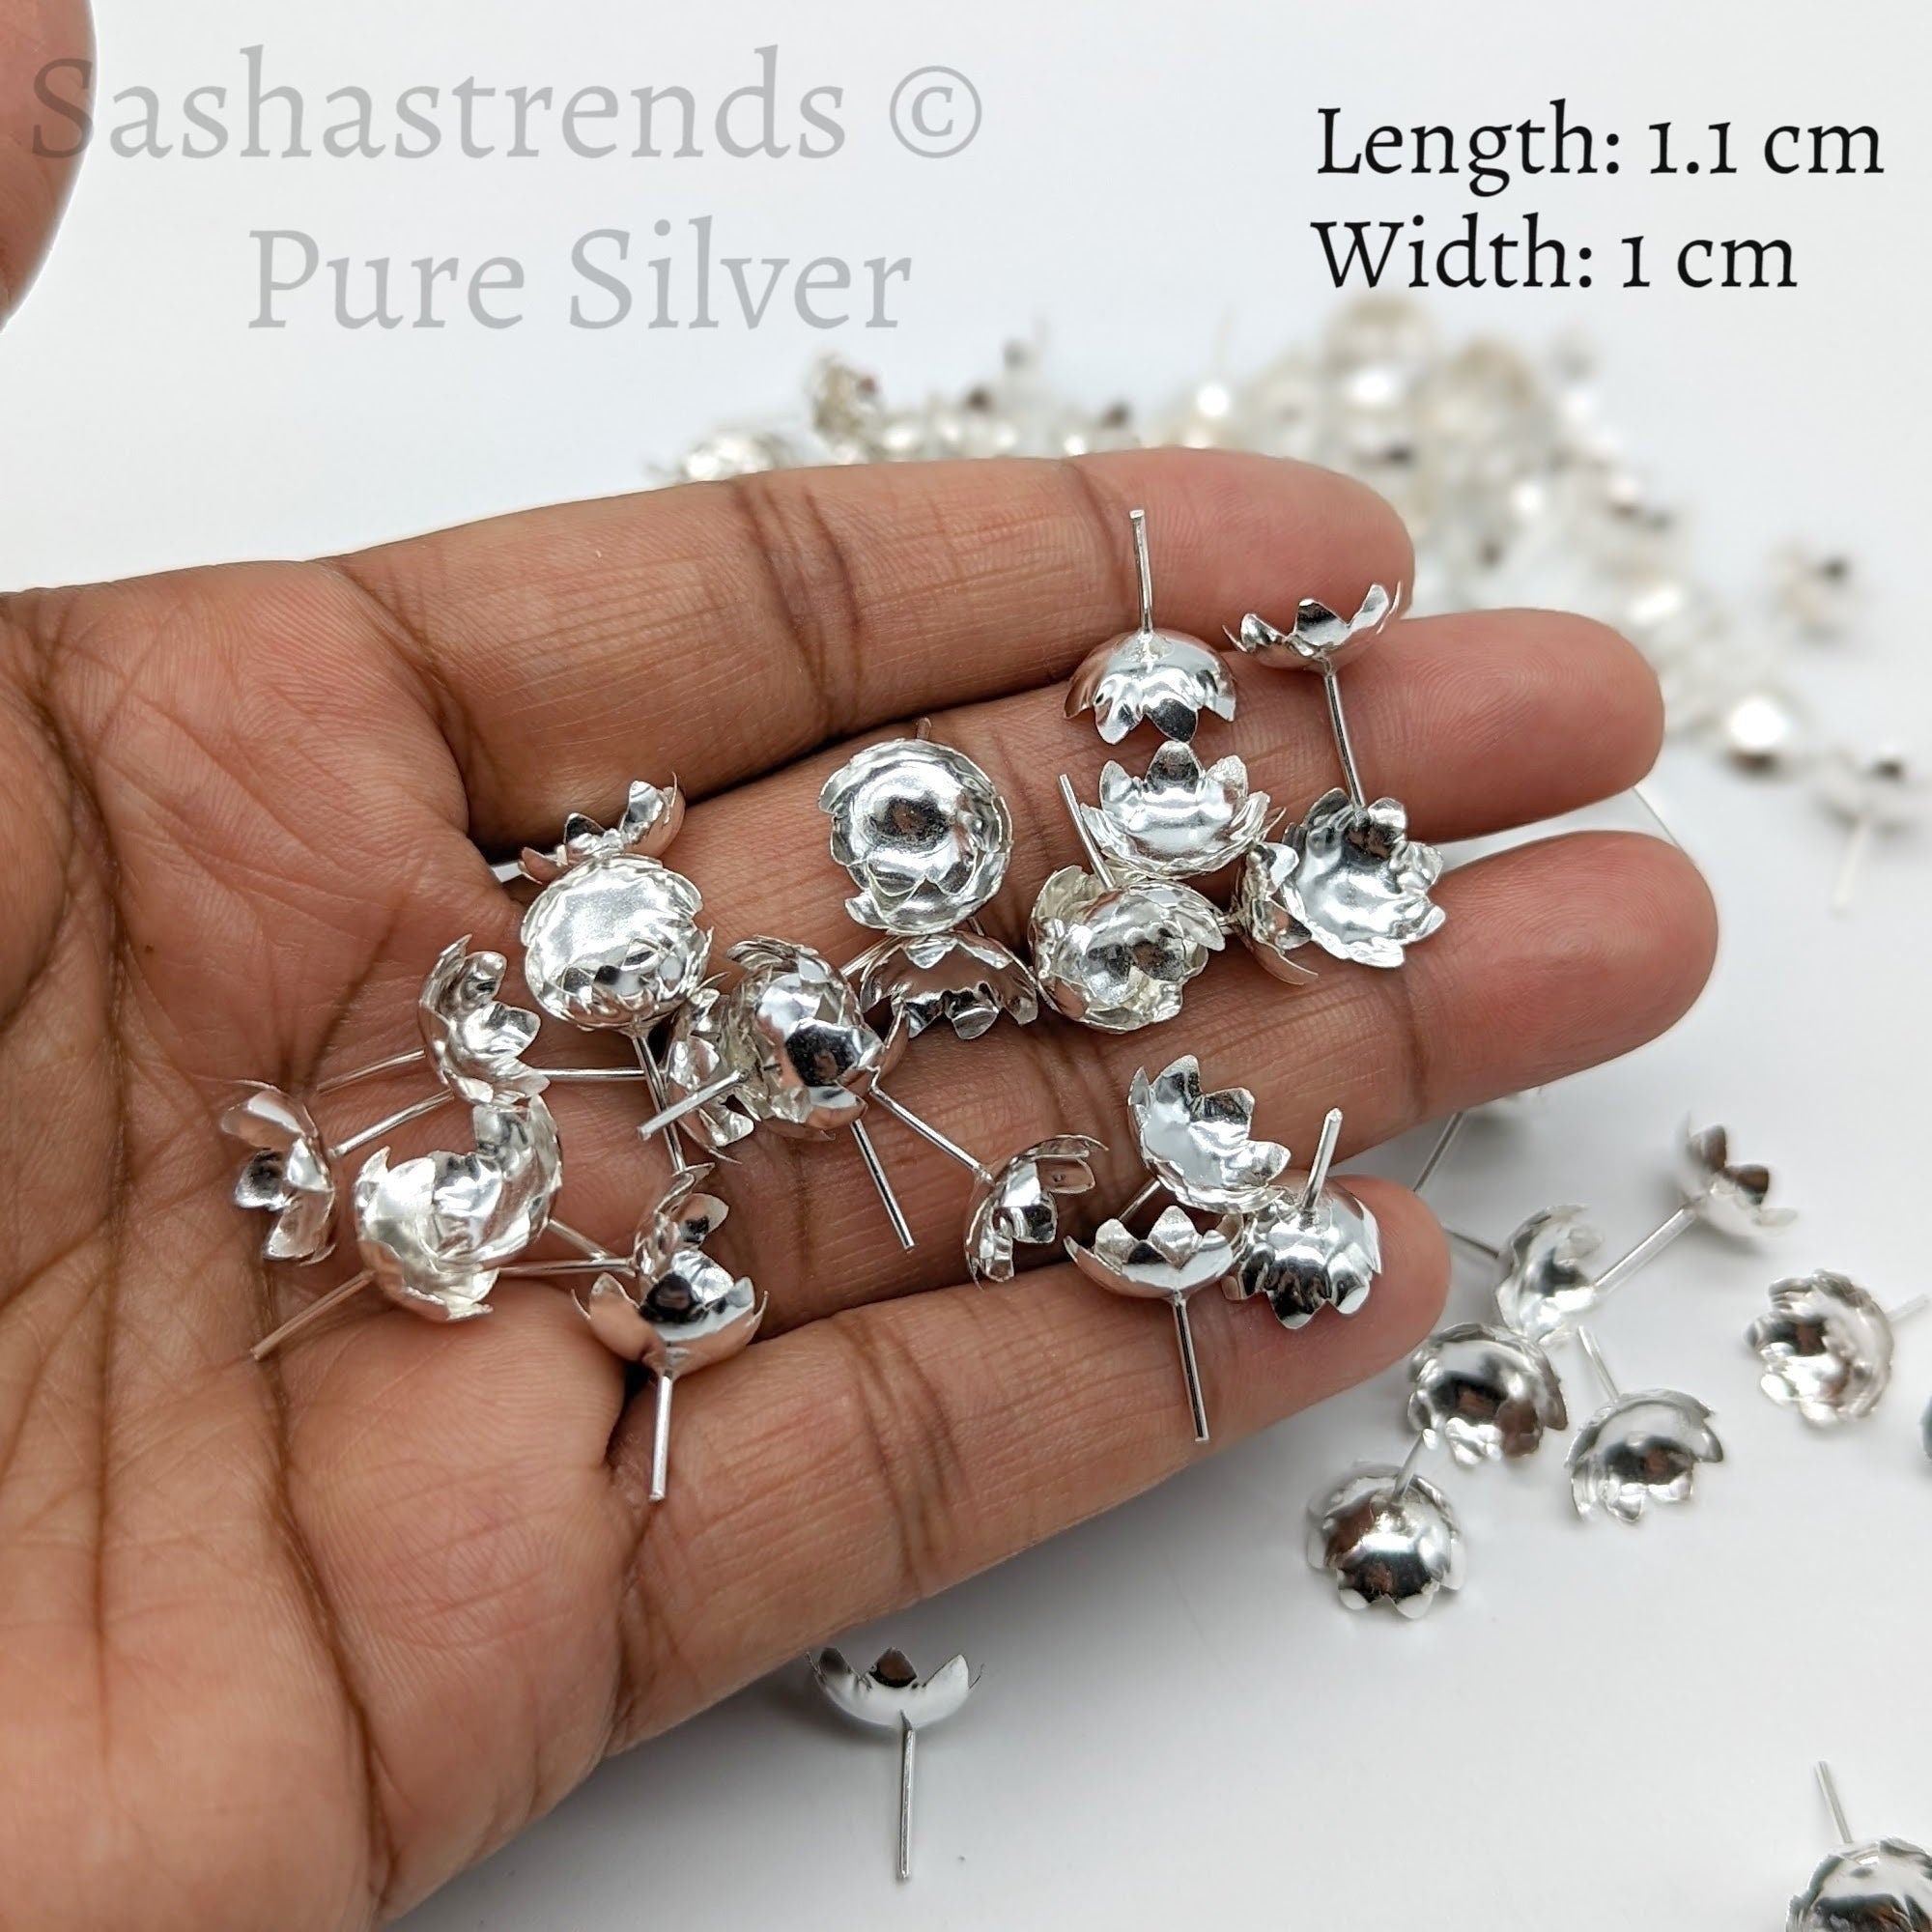 Pure silver gold polish 108 flowers-pure silver gift items- hindu pooja item-return  gift for navarathri- gift housewarmi… | Silver gifts, Gold polish, Pure  products